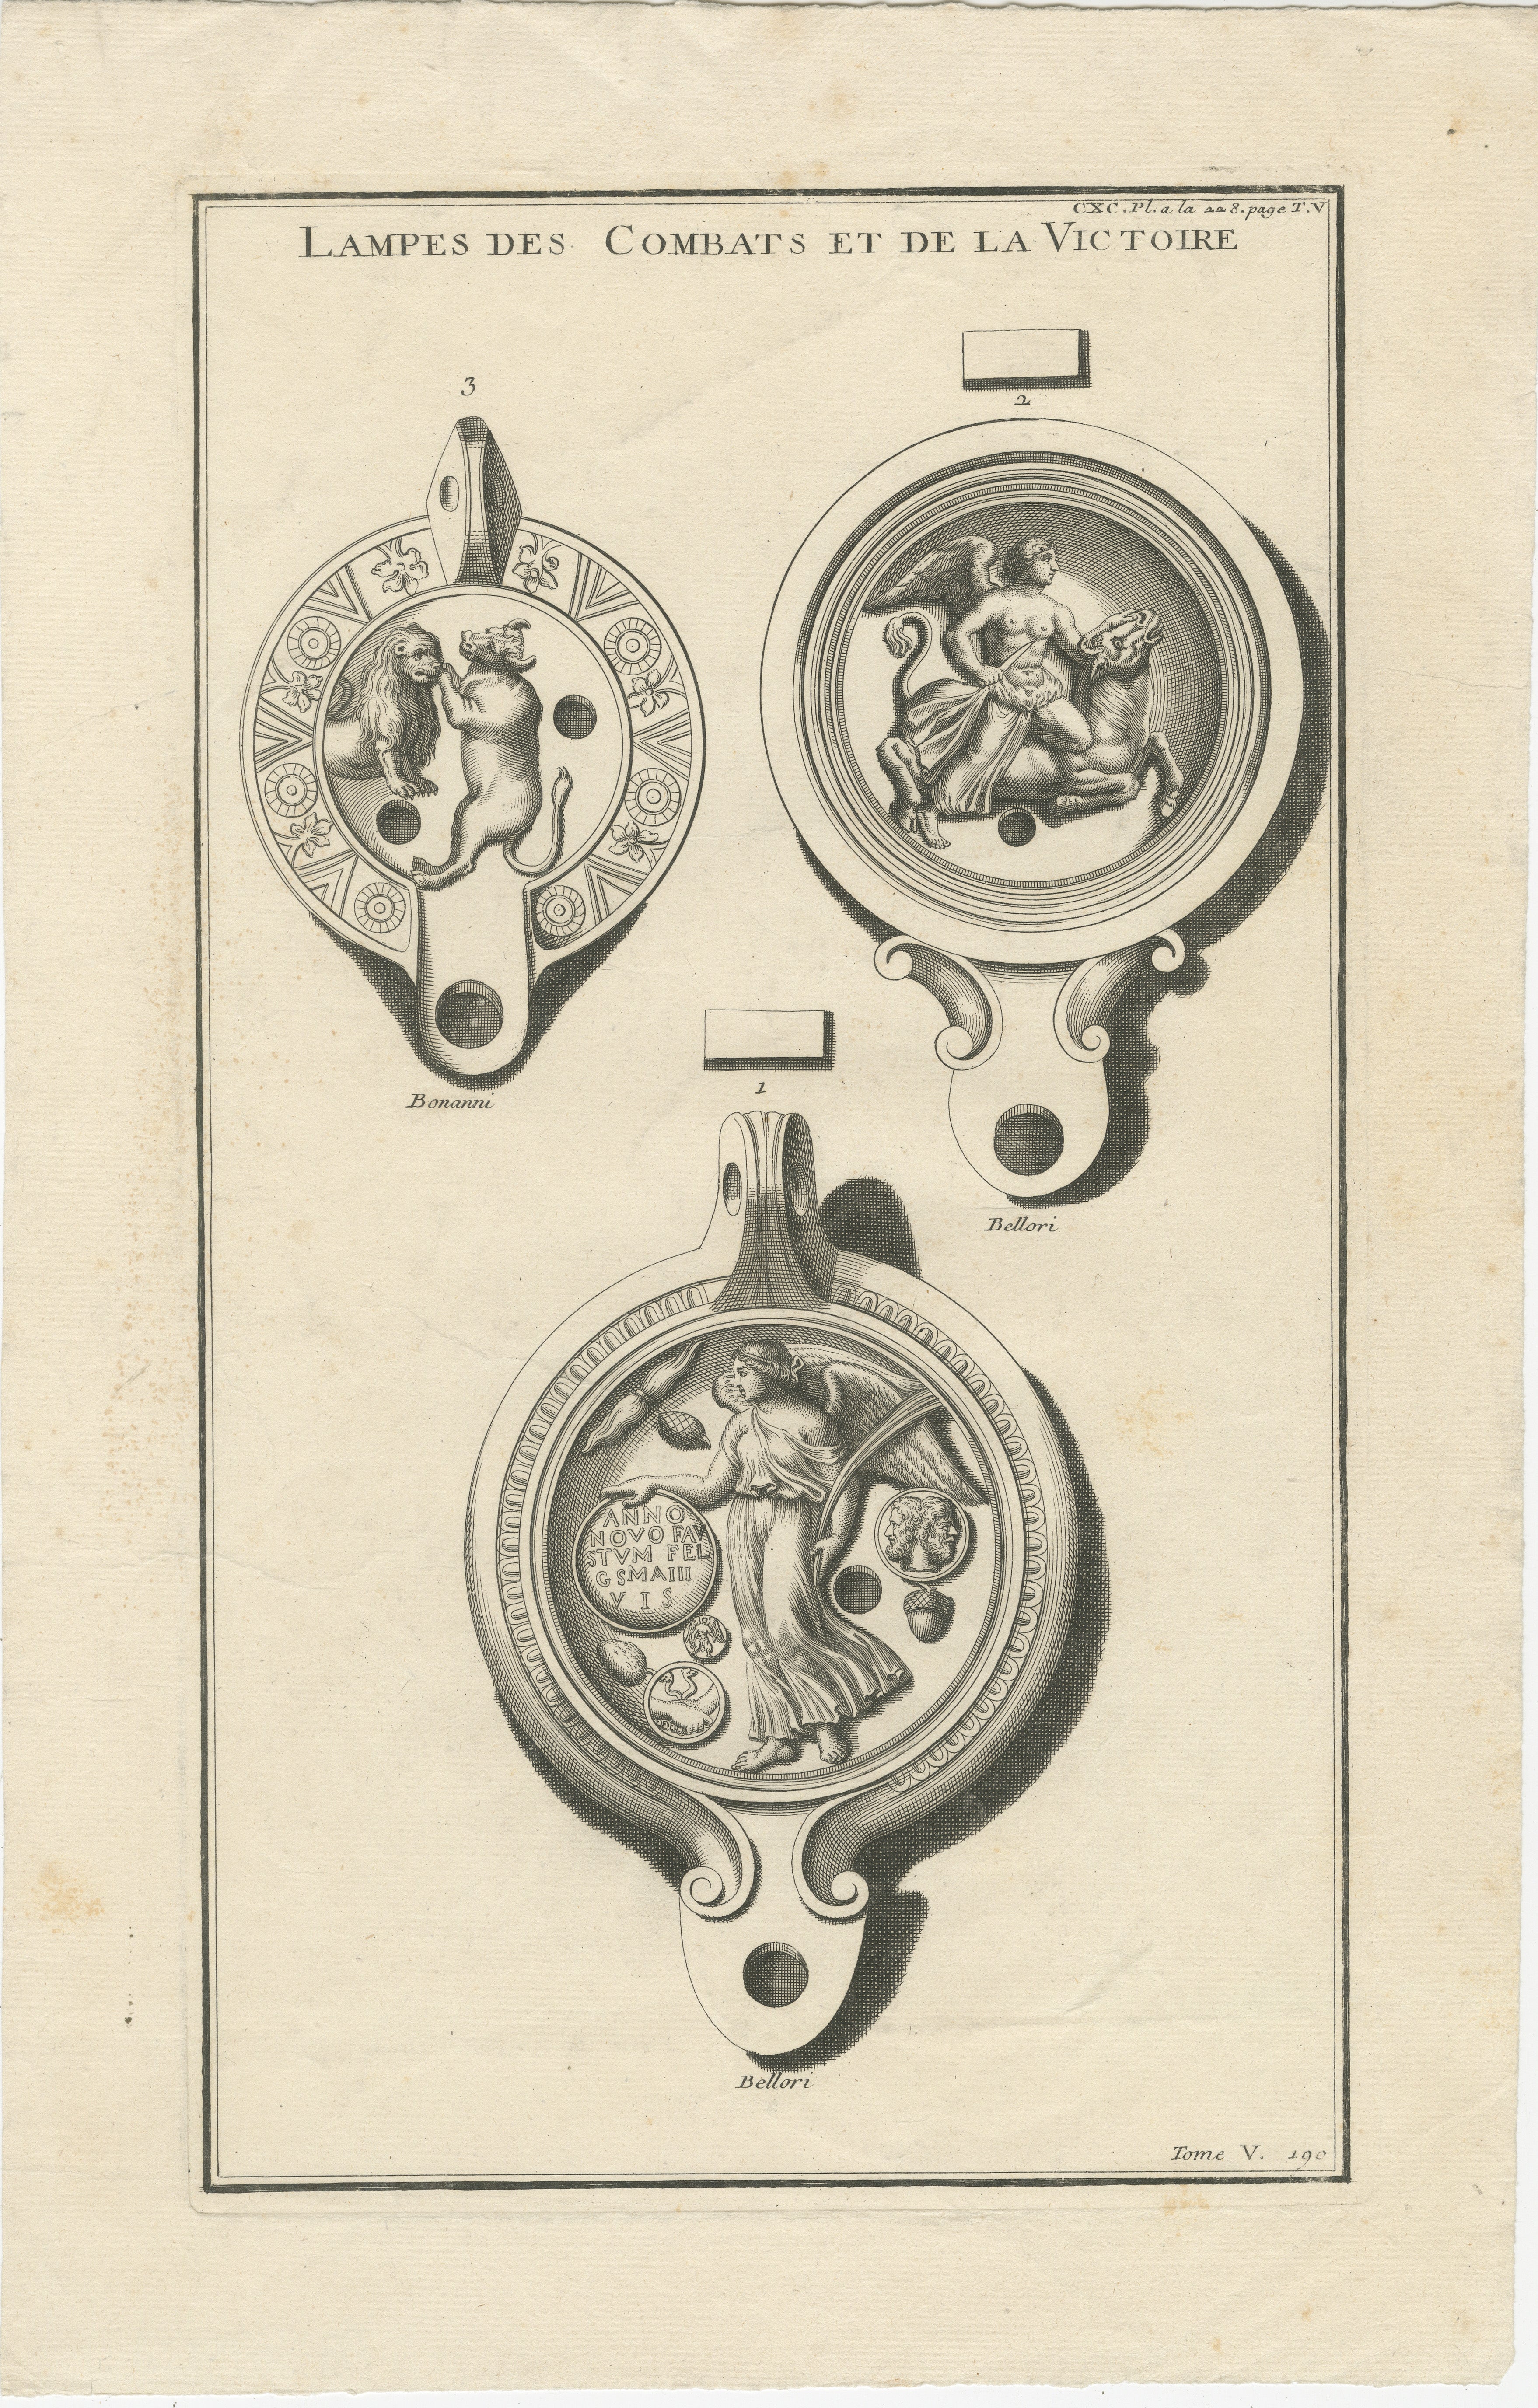 This 1722 engraving portrays an ancient lamp, intricately designed with the scene of tauroctony, which is a depiction of Mithras slaying a bull, a central motif in the mystery religion known as Mithraism. The image is taken from Bernard de